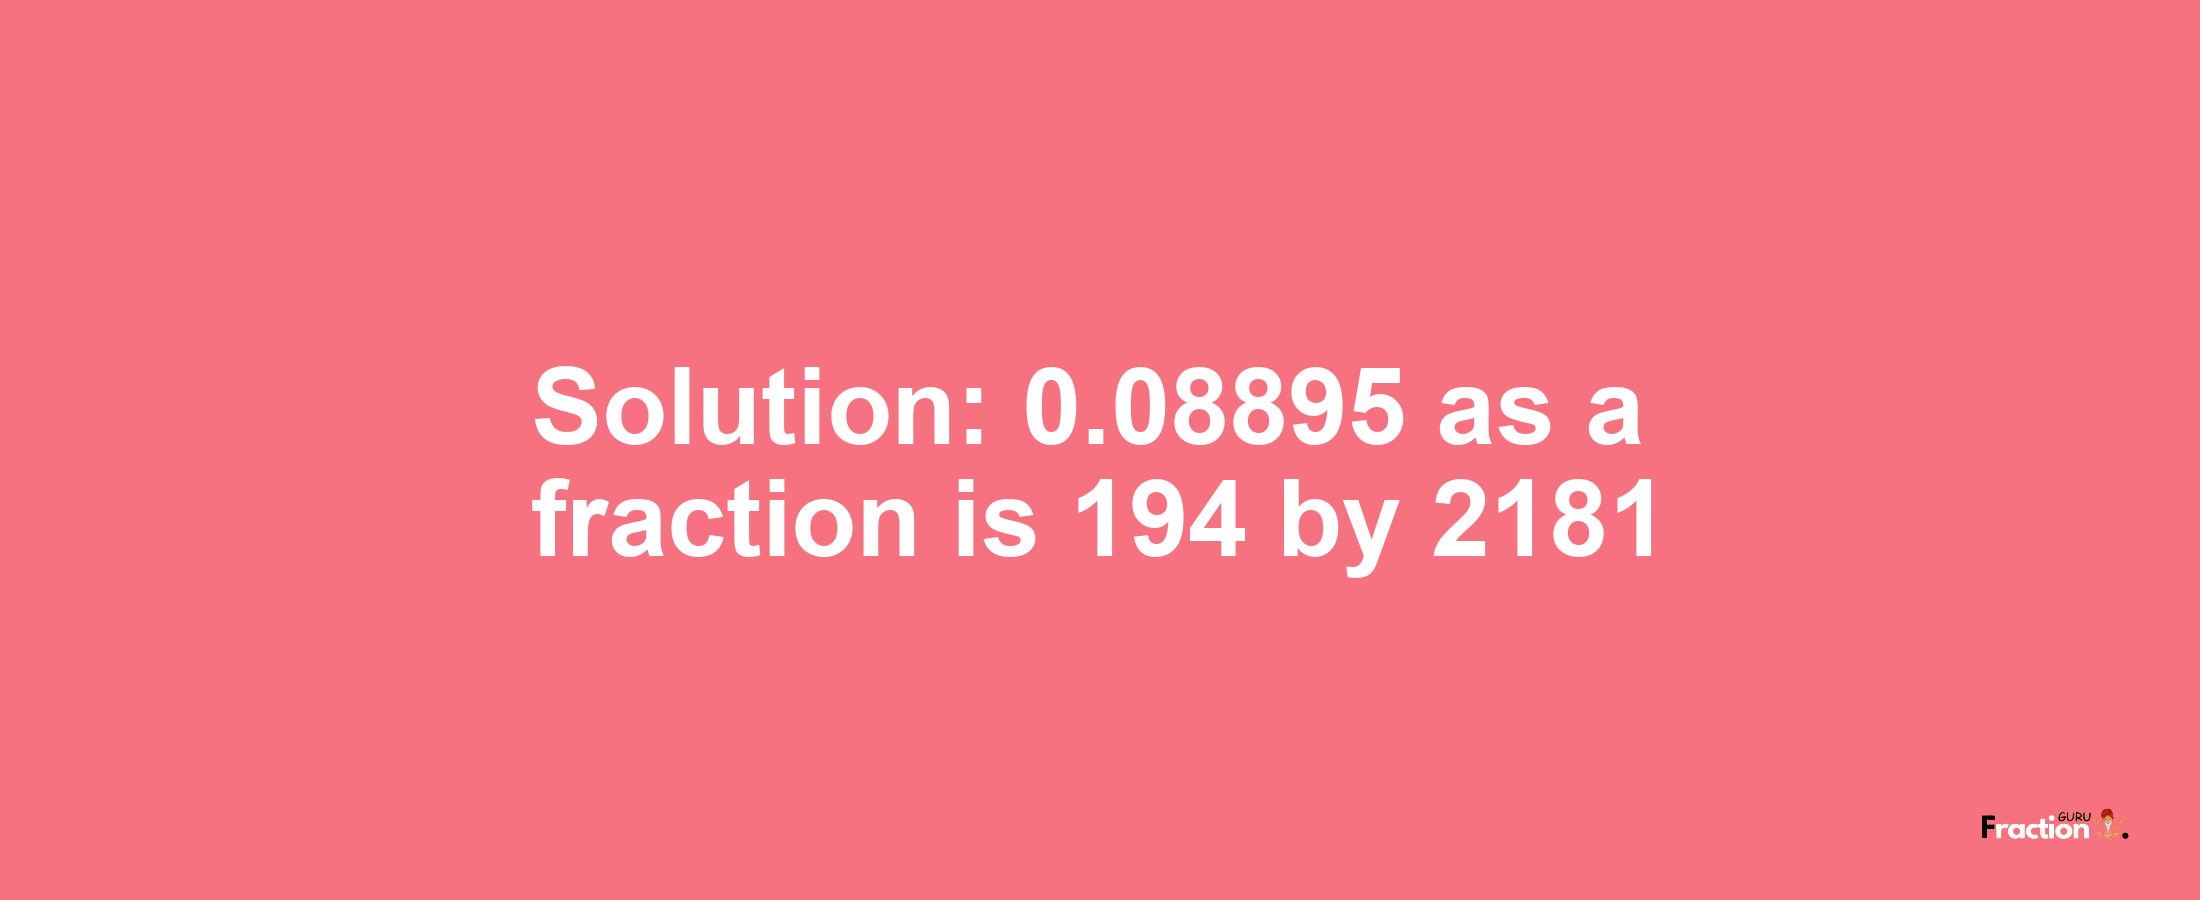 Solution:0.08895 as a fraction is 194/2181